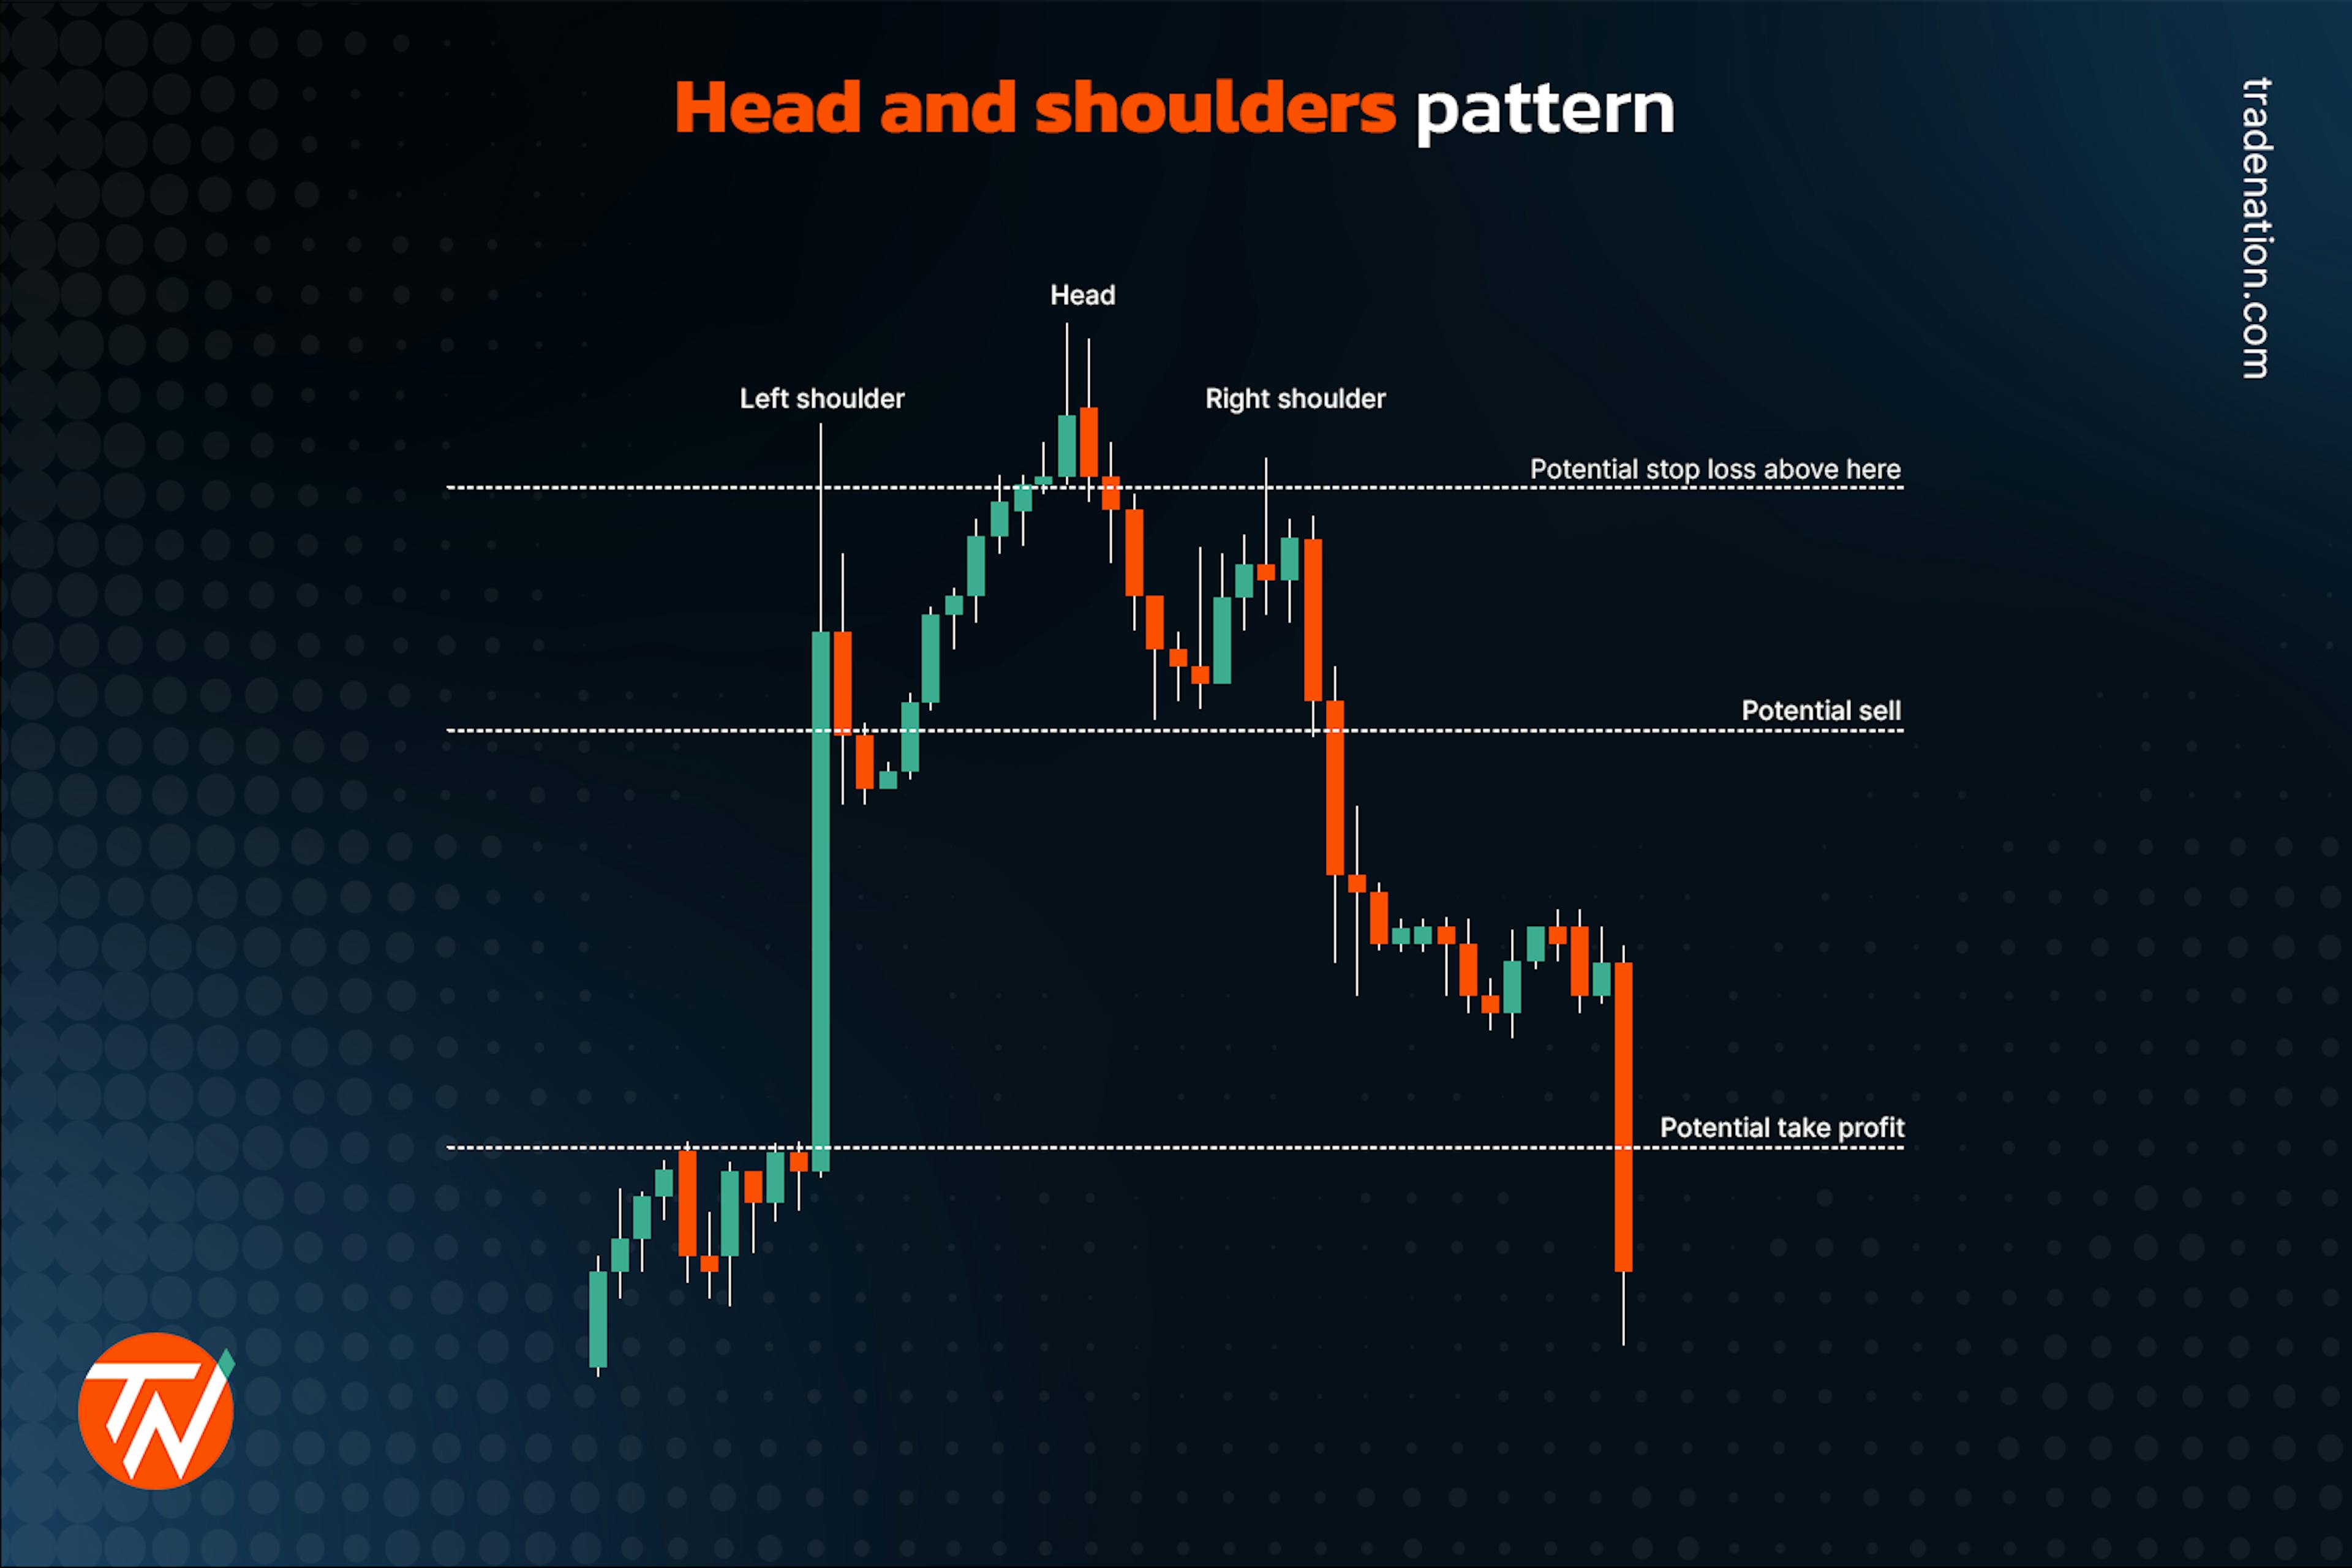 Trading using the head and shoulders pattern